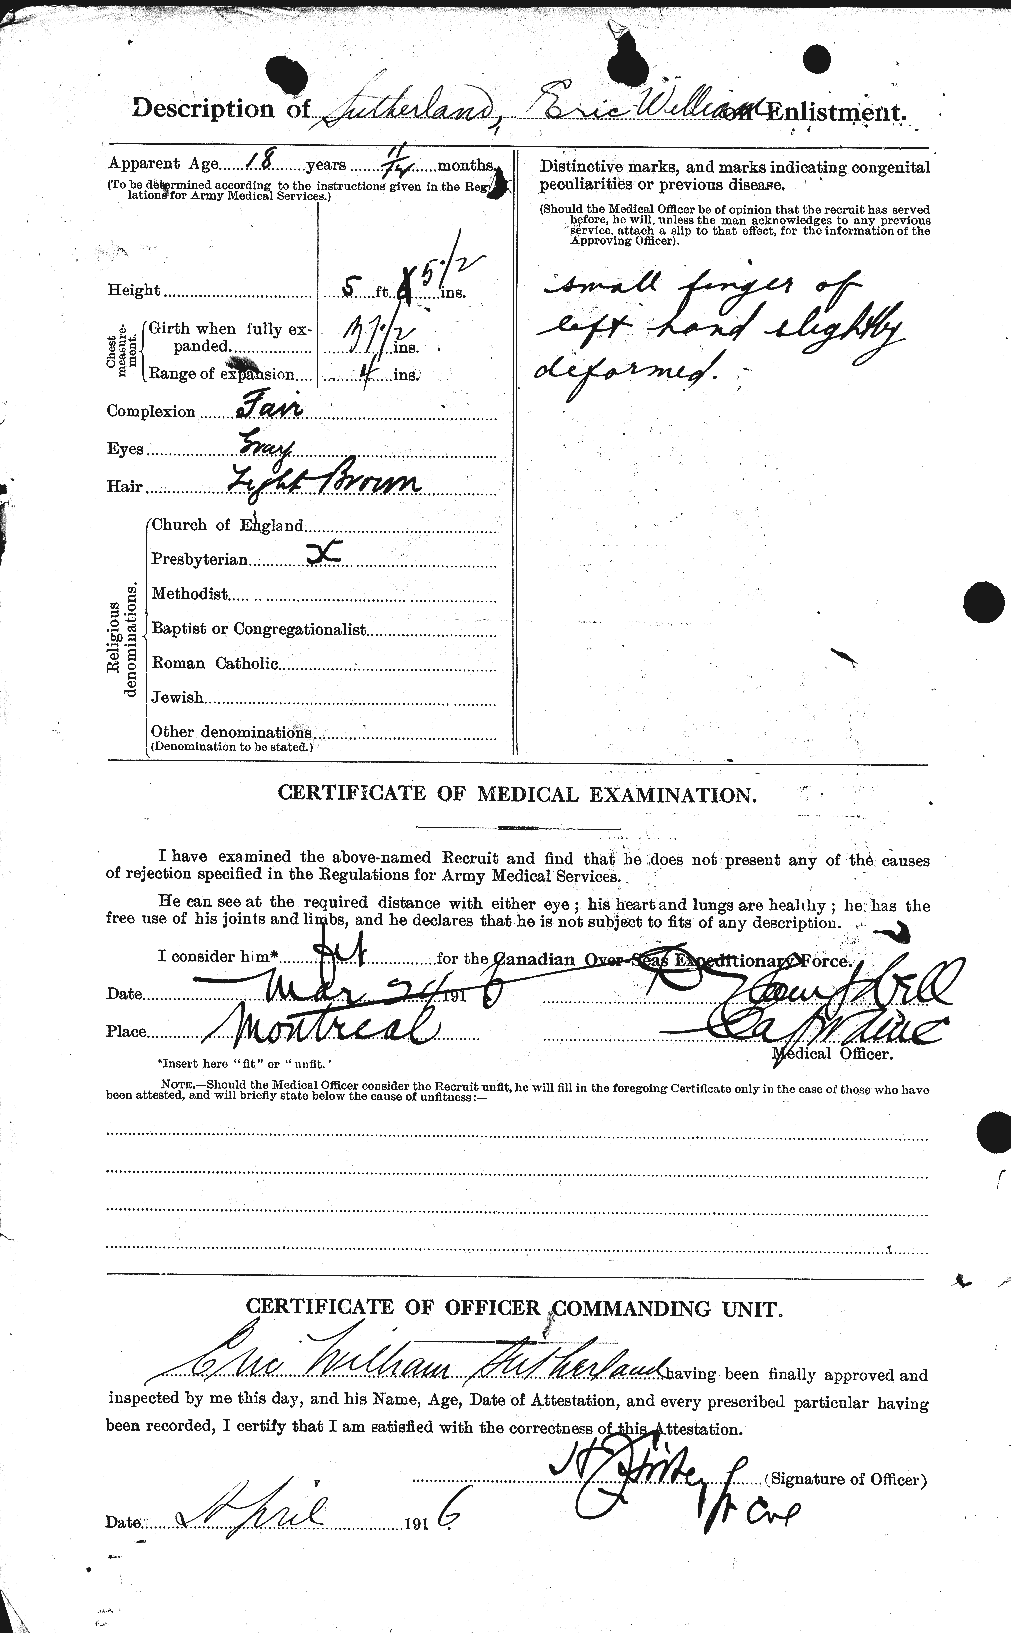 Personnel Records of the First World War - CEF 124897b